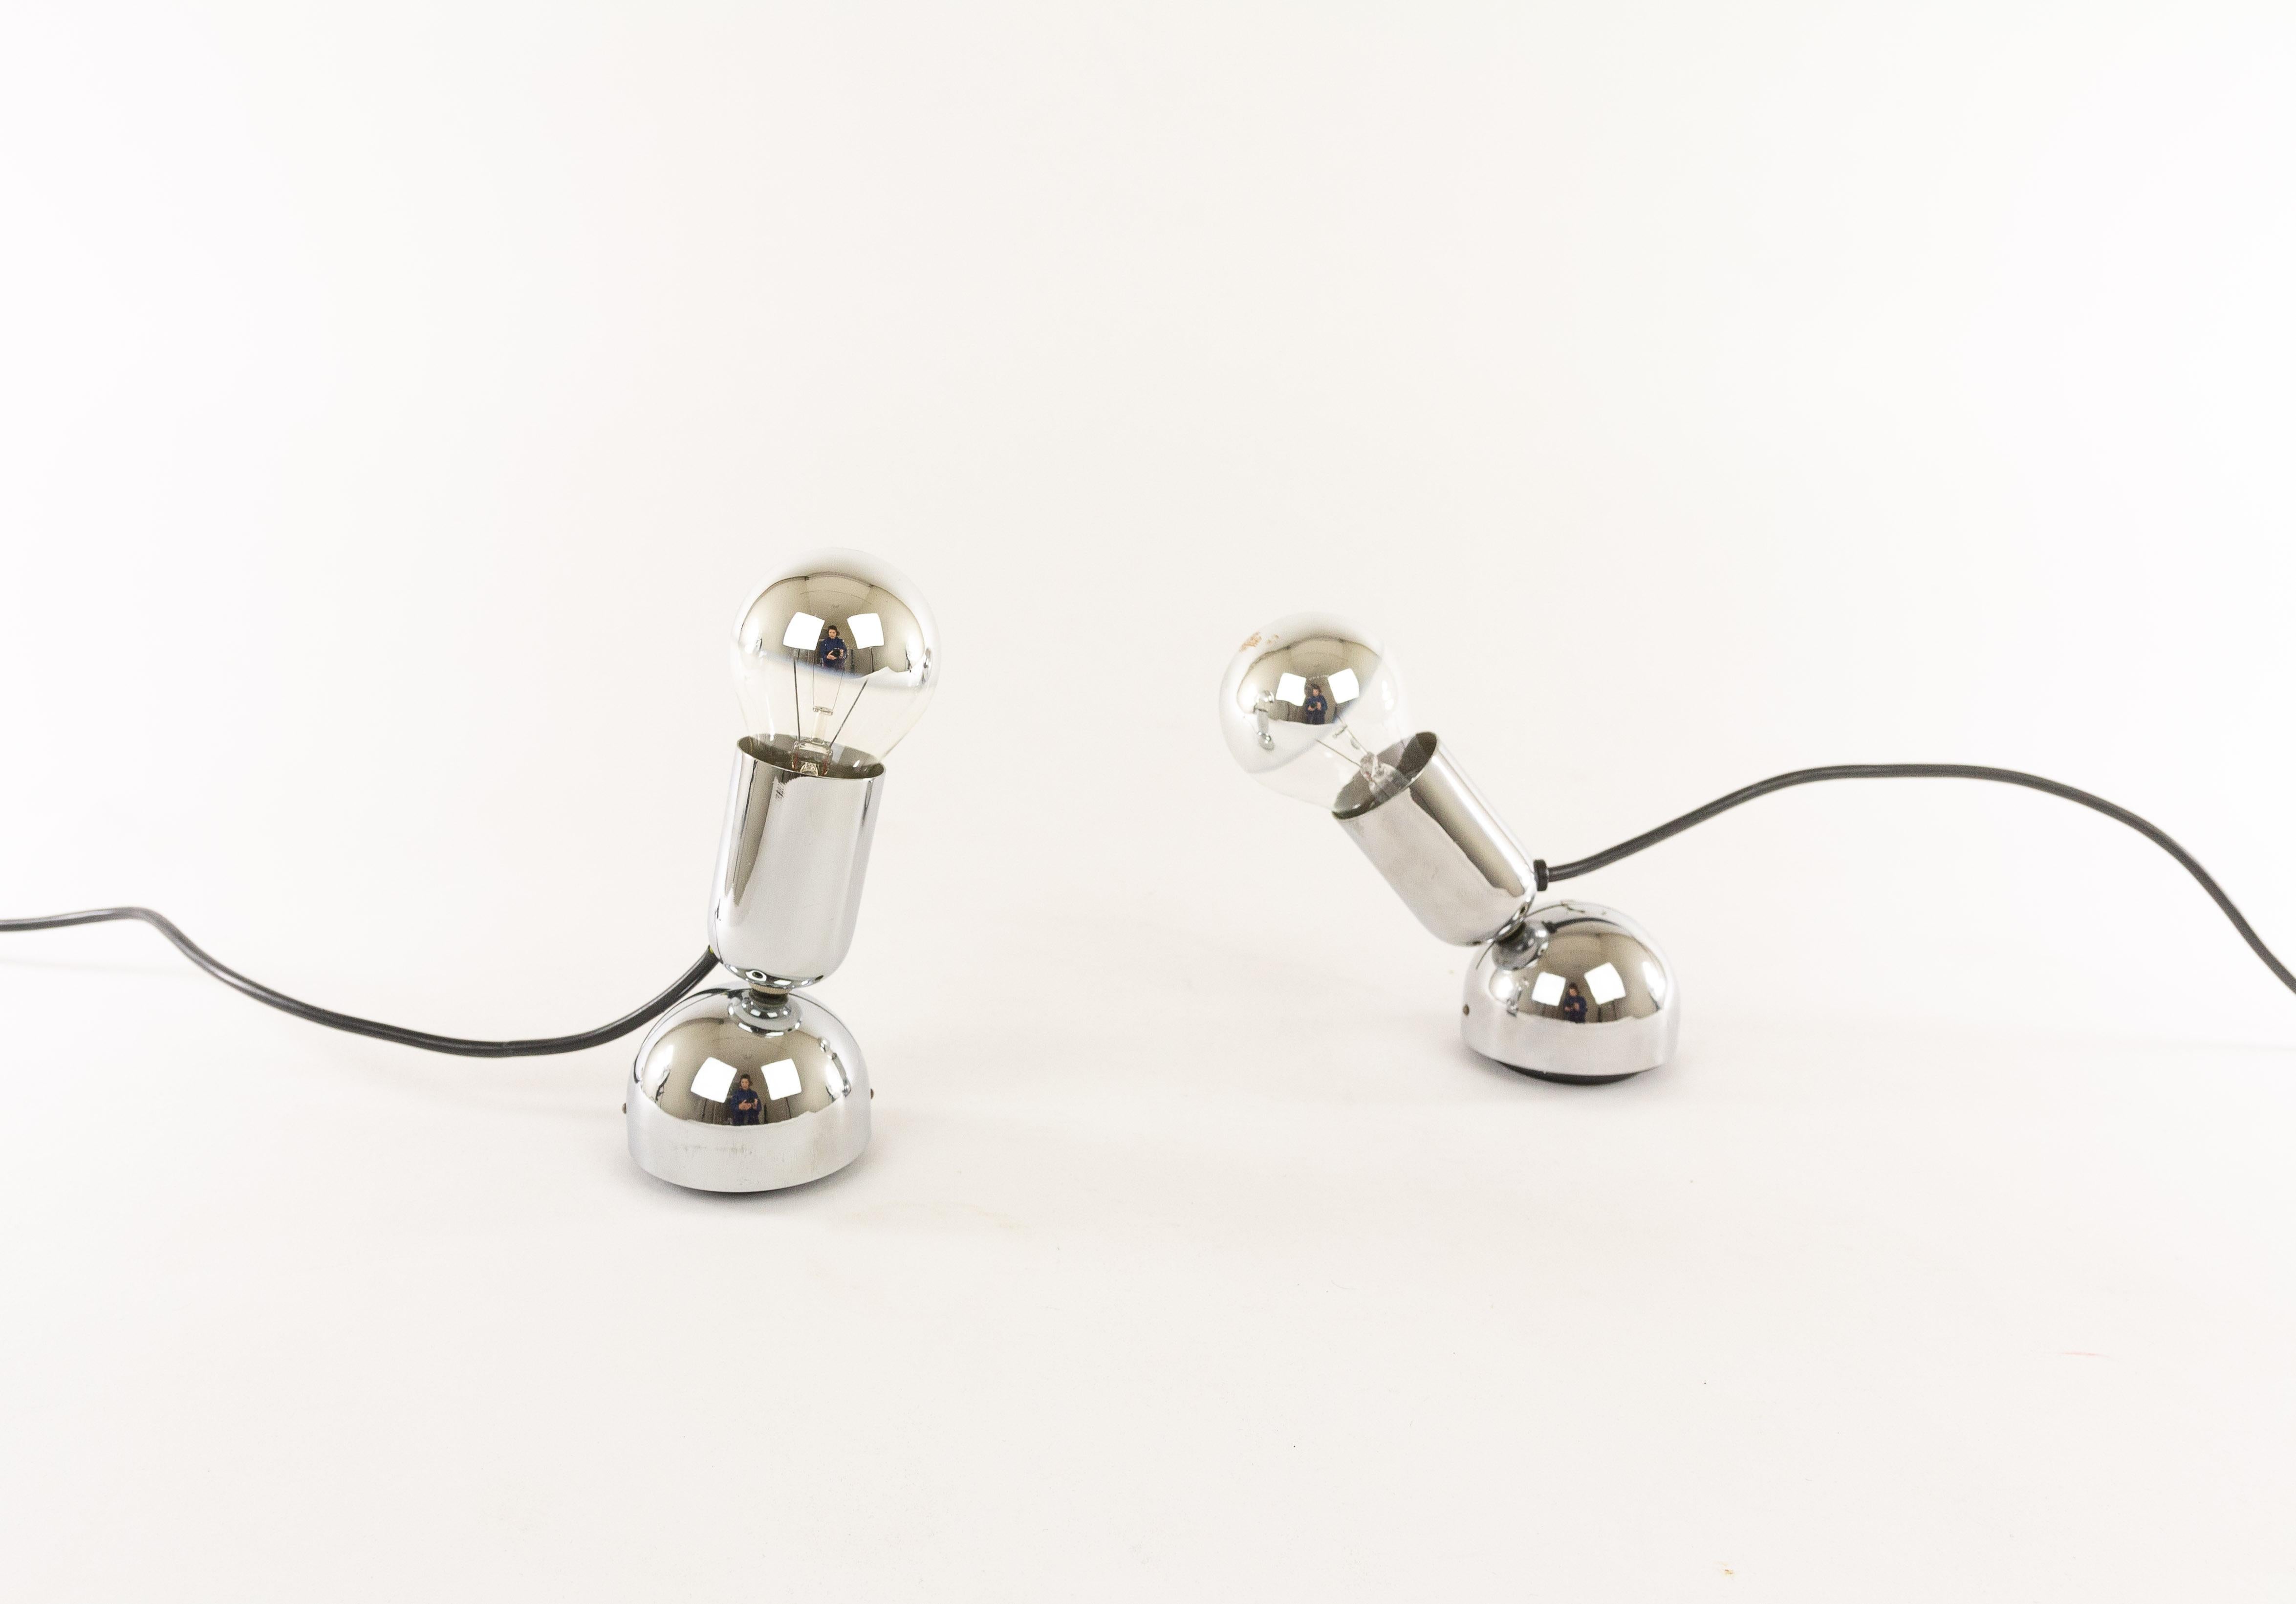 A pair of chrome Pollux table or wall lamps designed by Ingo Maurer and produced by his own company Design M.

Pollux consists of a relatively heavy base, a tube which contains the socket and that swivels on its axis and an -indispensable- half